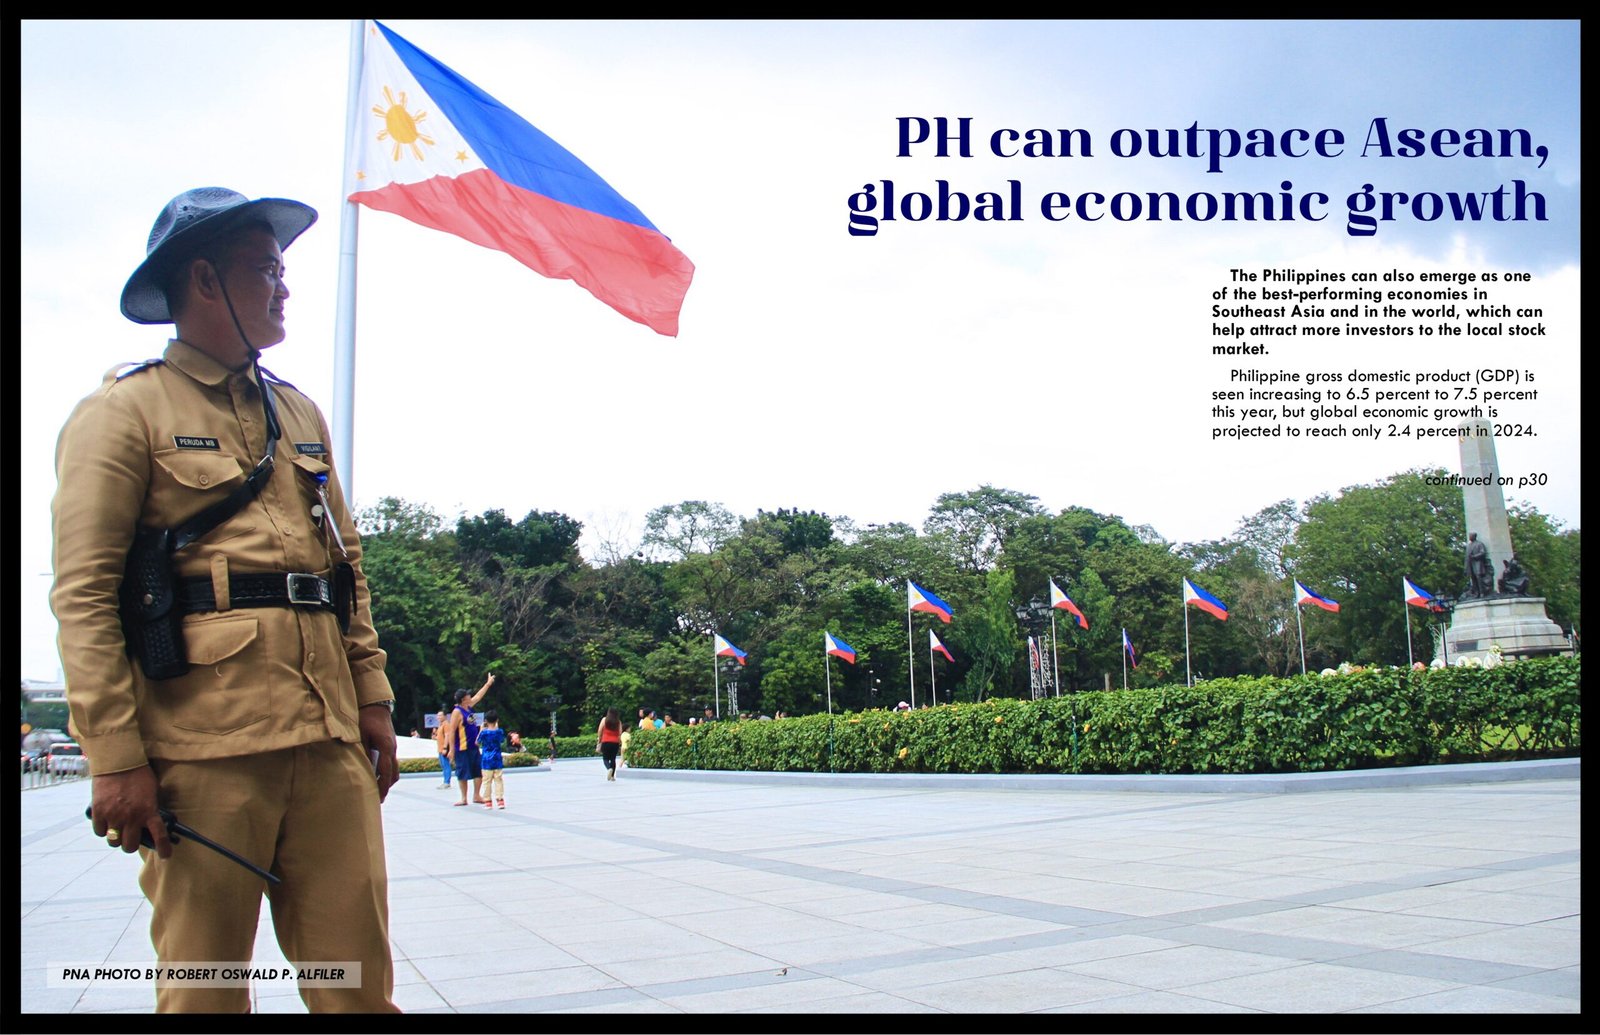 PH can outpace Asean, global economic growth